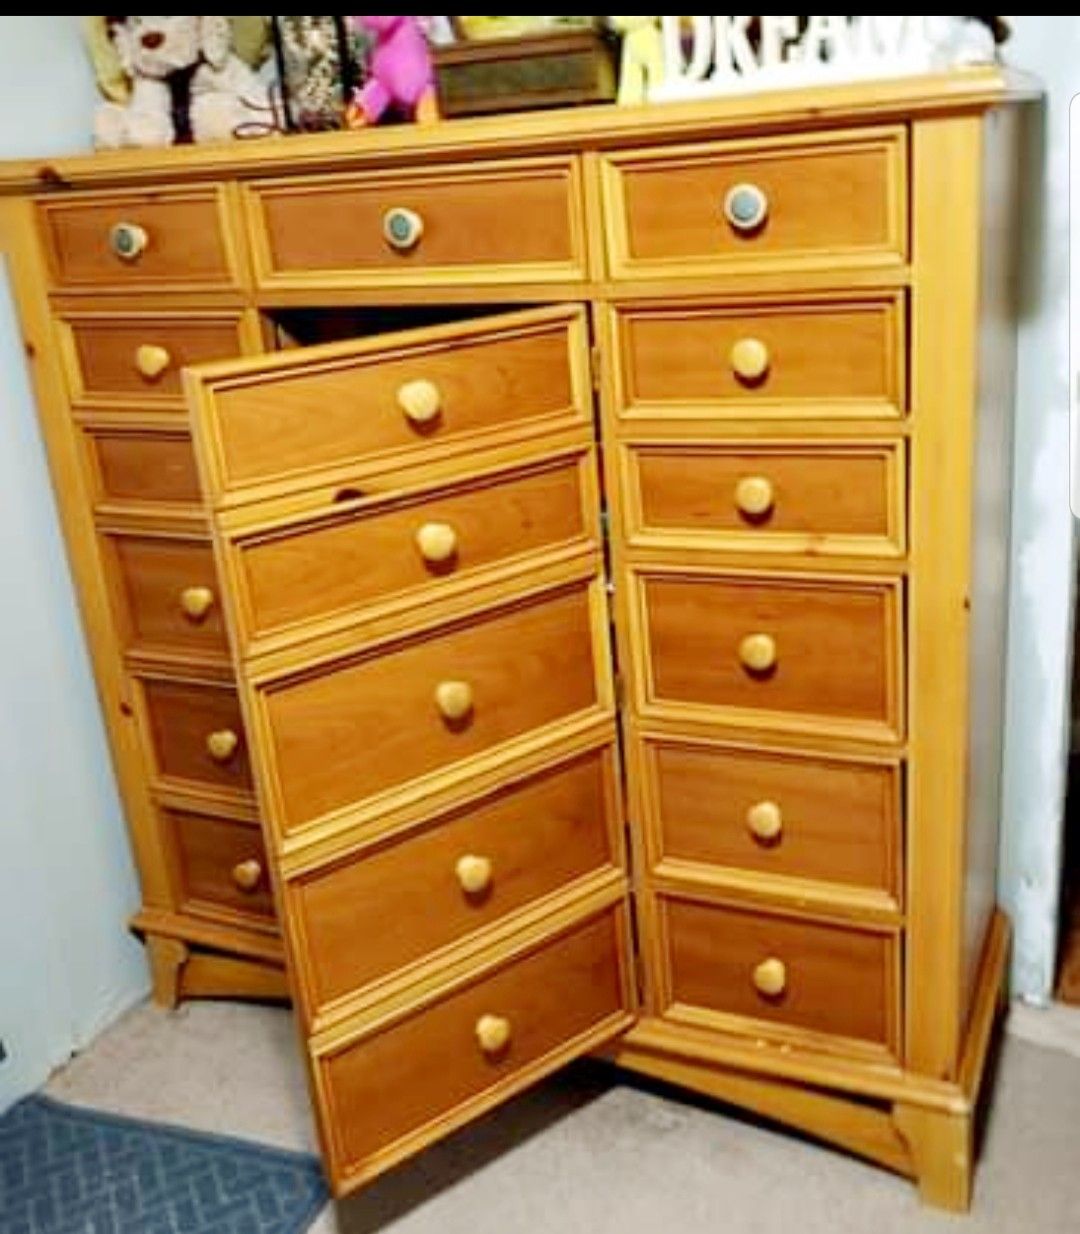 Solid Wood Dresser with Cedar Lined Armiore and hidden jewelry box